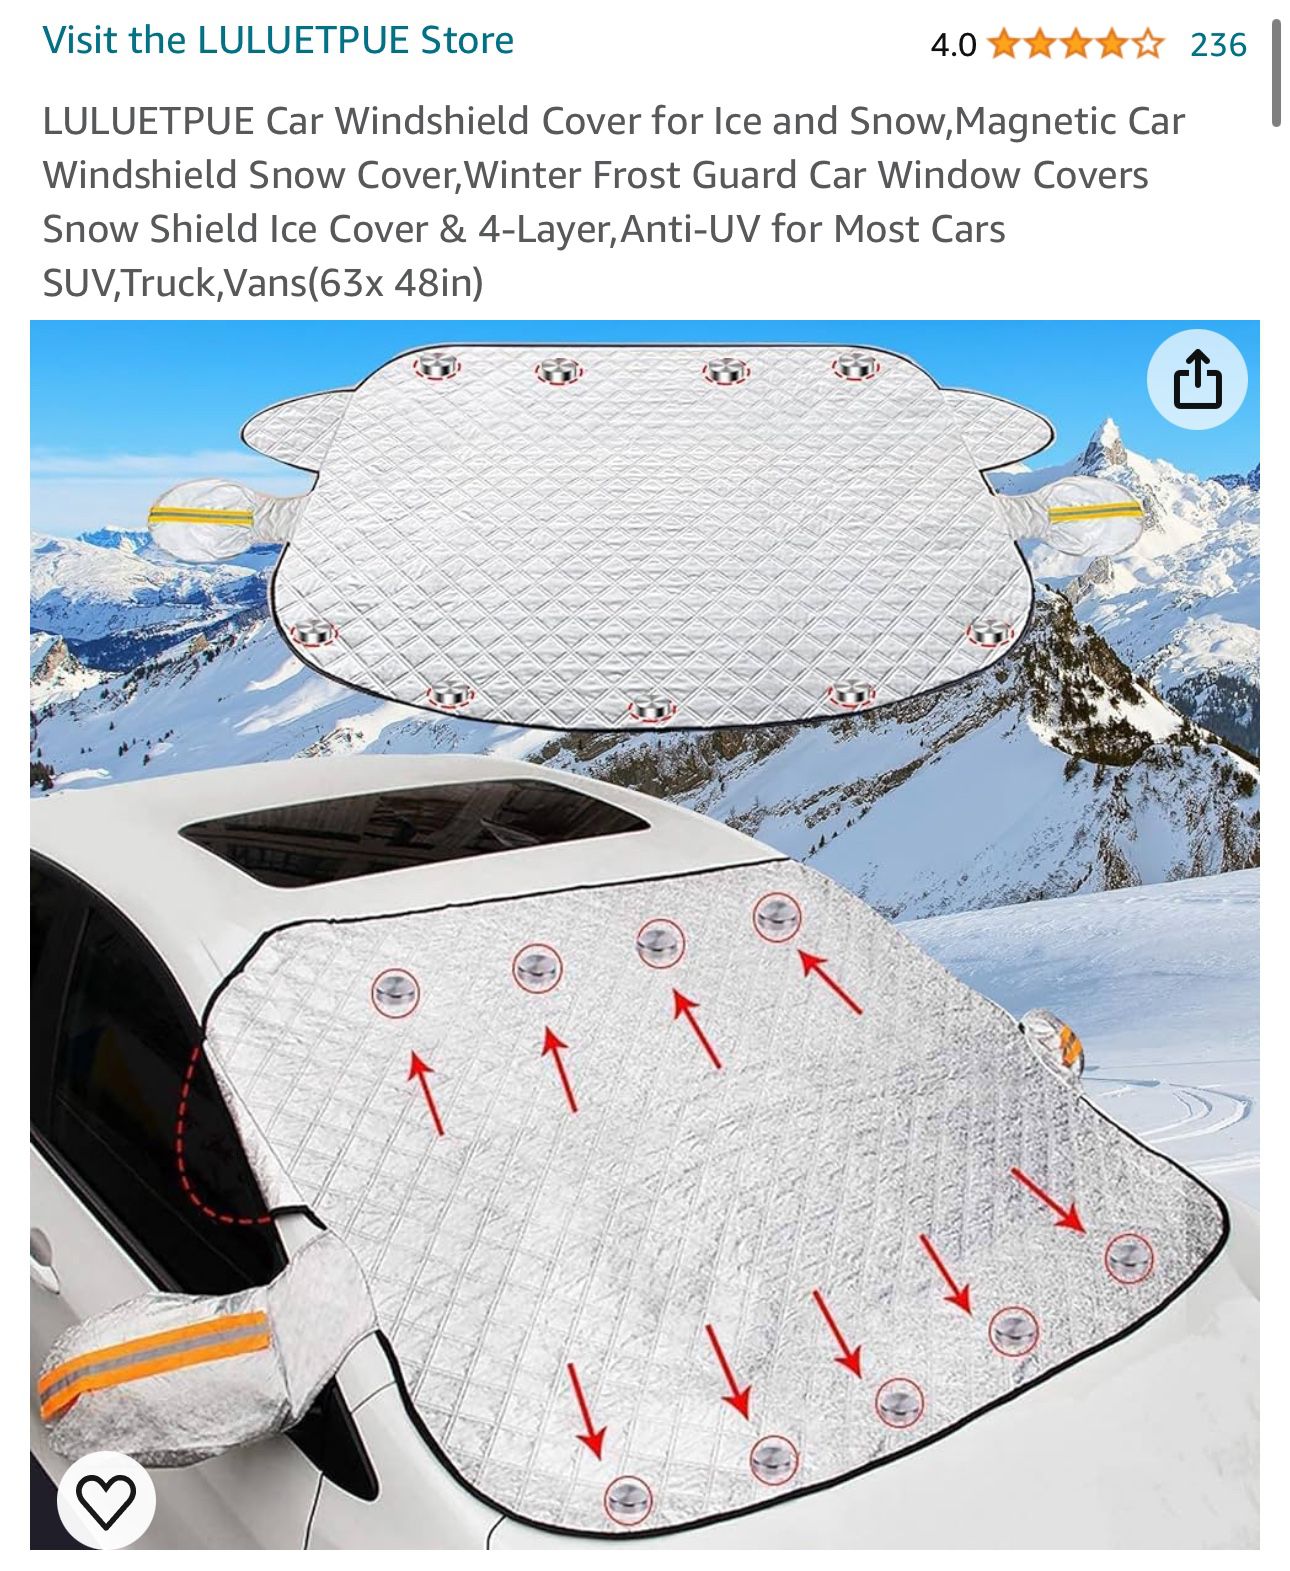 LULUETPUE Car Windshield Cover for Ice and Snow,Magnetic Car Windshield Snow Cover,Winter Frost Guard Car Window Covers Snow Shield Ice Cover & 4-Laye